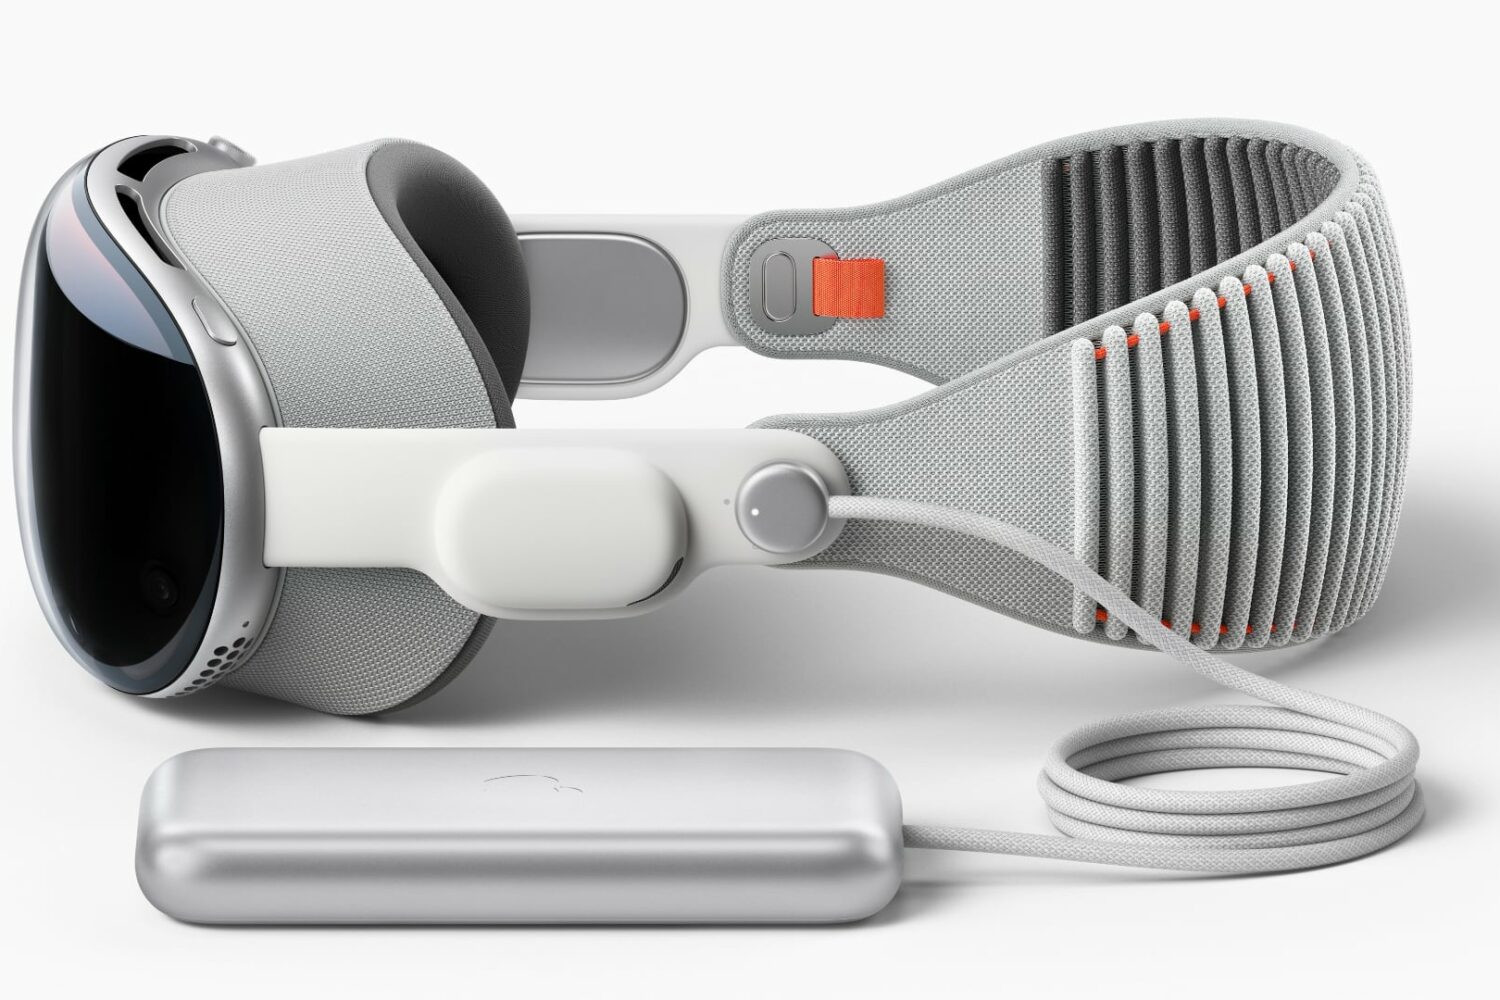 The left side of Apple's Vision Pro headset with its external battery pack